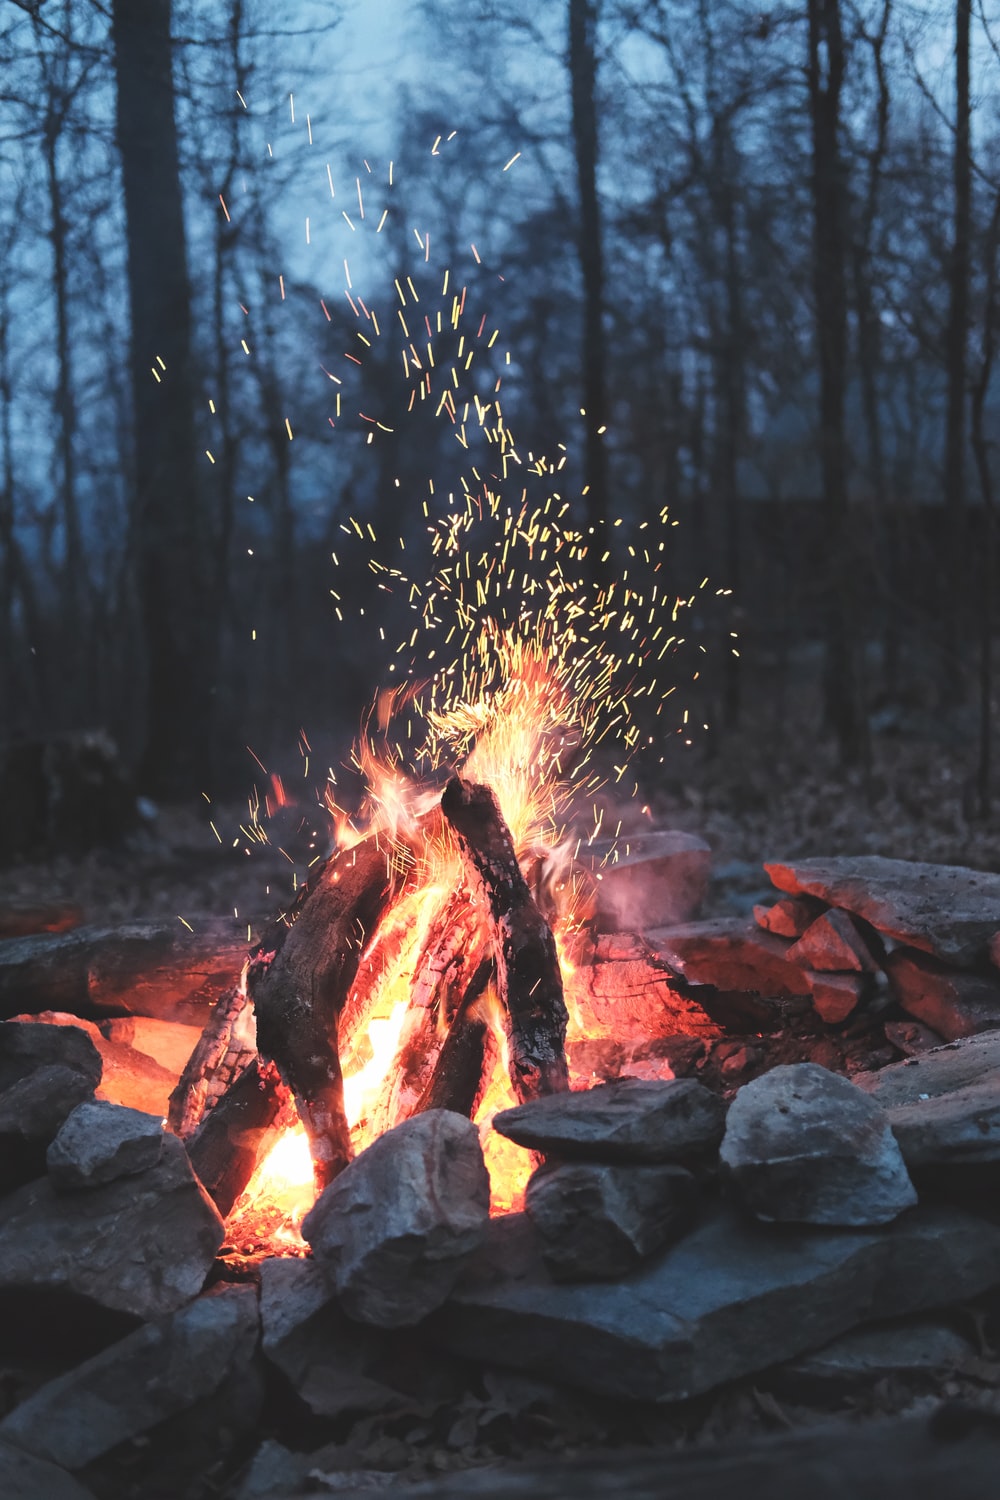 Fire Winter Picture. Download Free Image